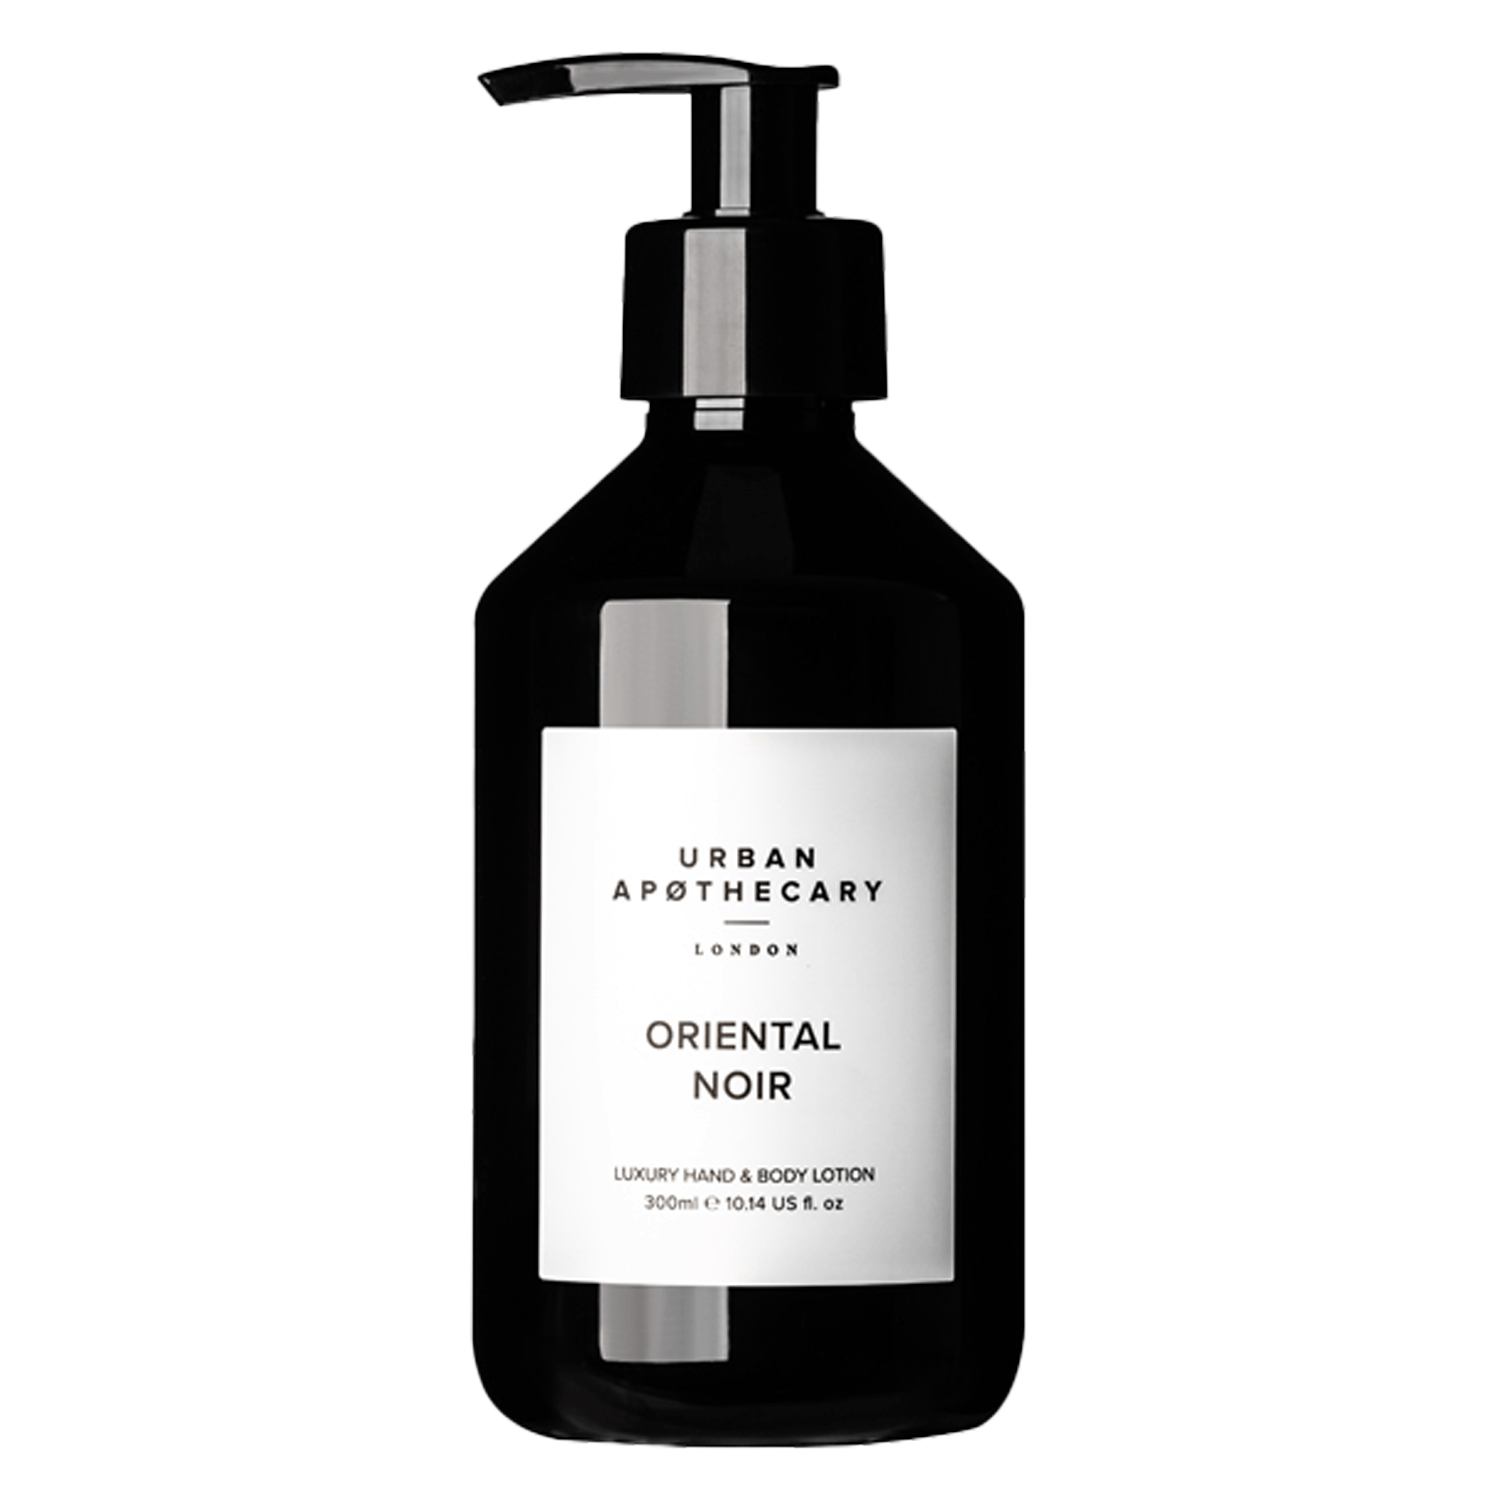 Product image from Urban Apothecary - Luxury Hand & Body Lotion Oriental Noir